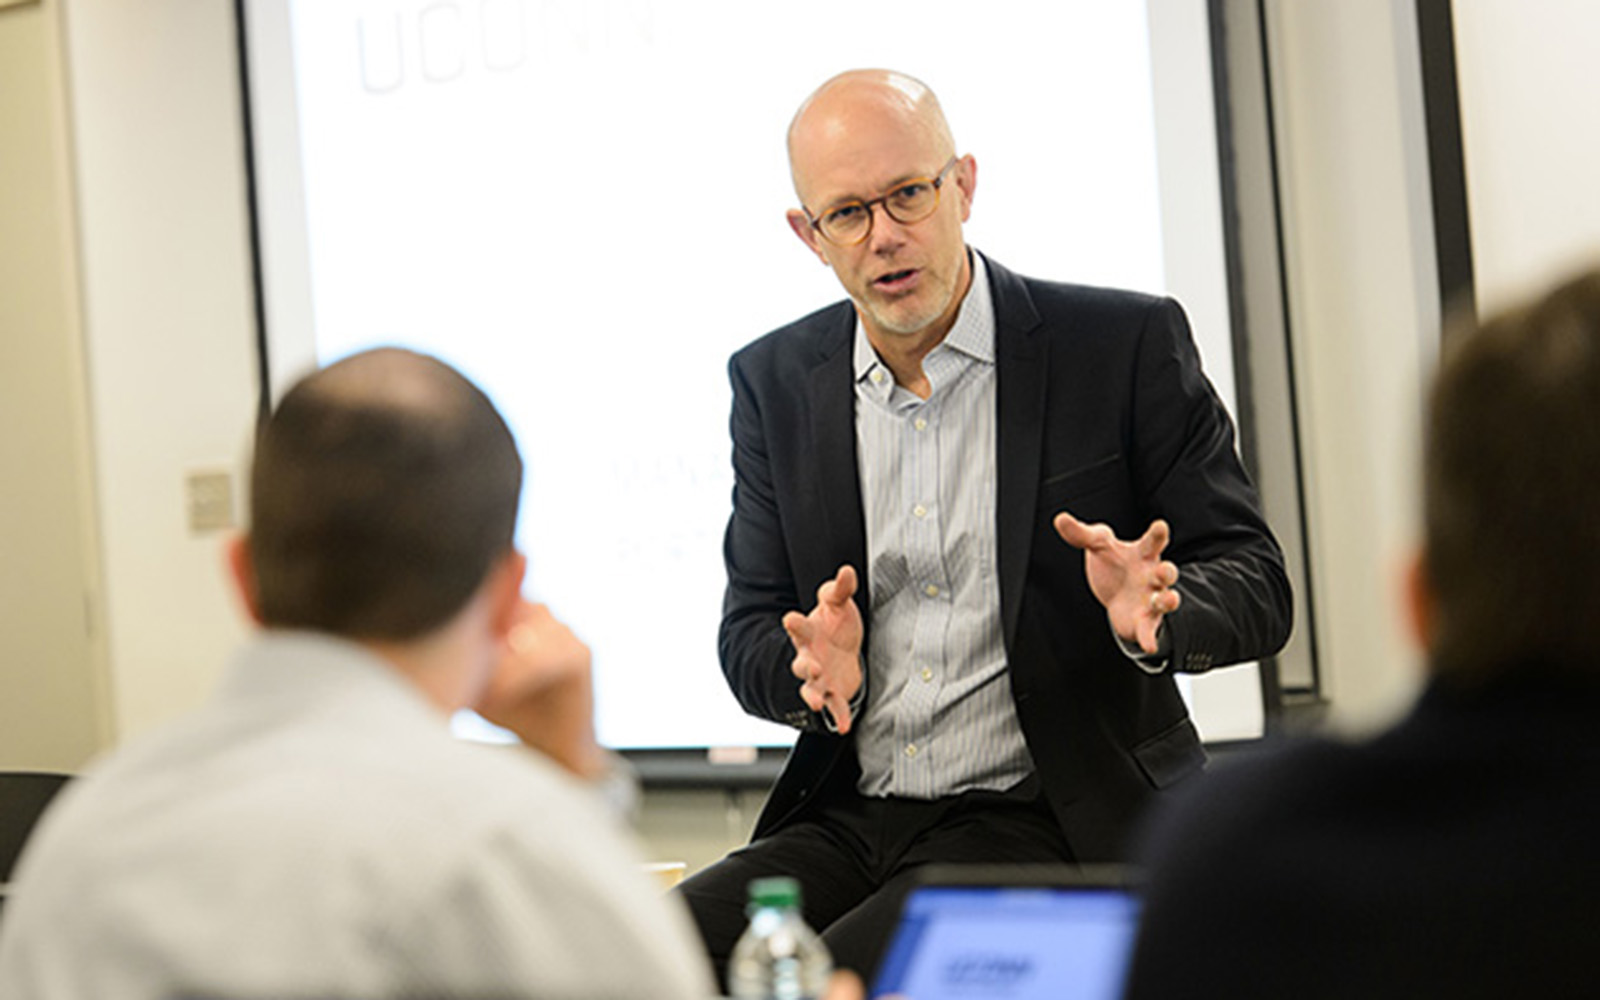 Timothy Folta, professor of management, leads a class at the Graduate Business Learning Center in Hartford. Folta is director of the Connecticut Center for Entrepreneurship and Innovation at UConn. (Peter Morenus/UConn File Photo)